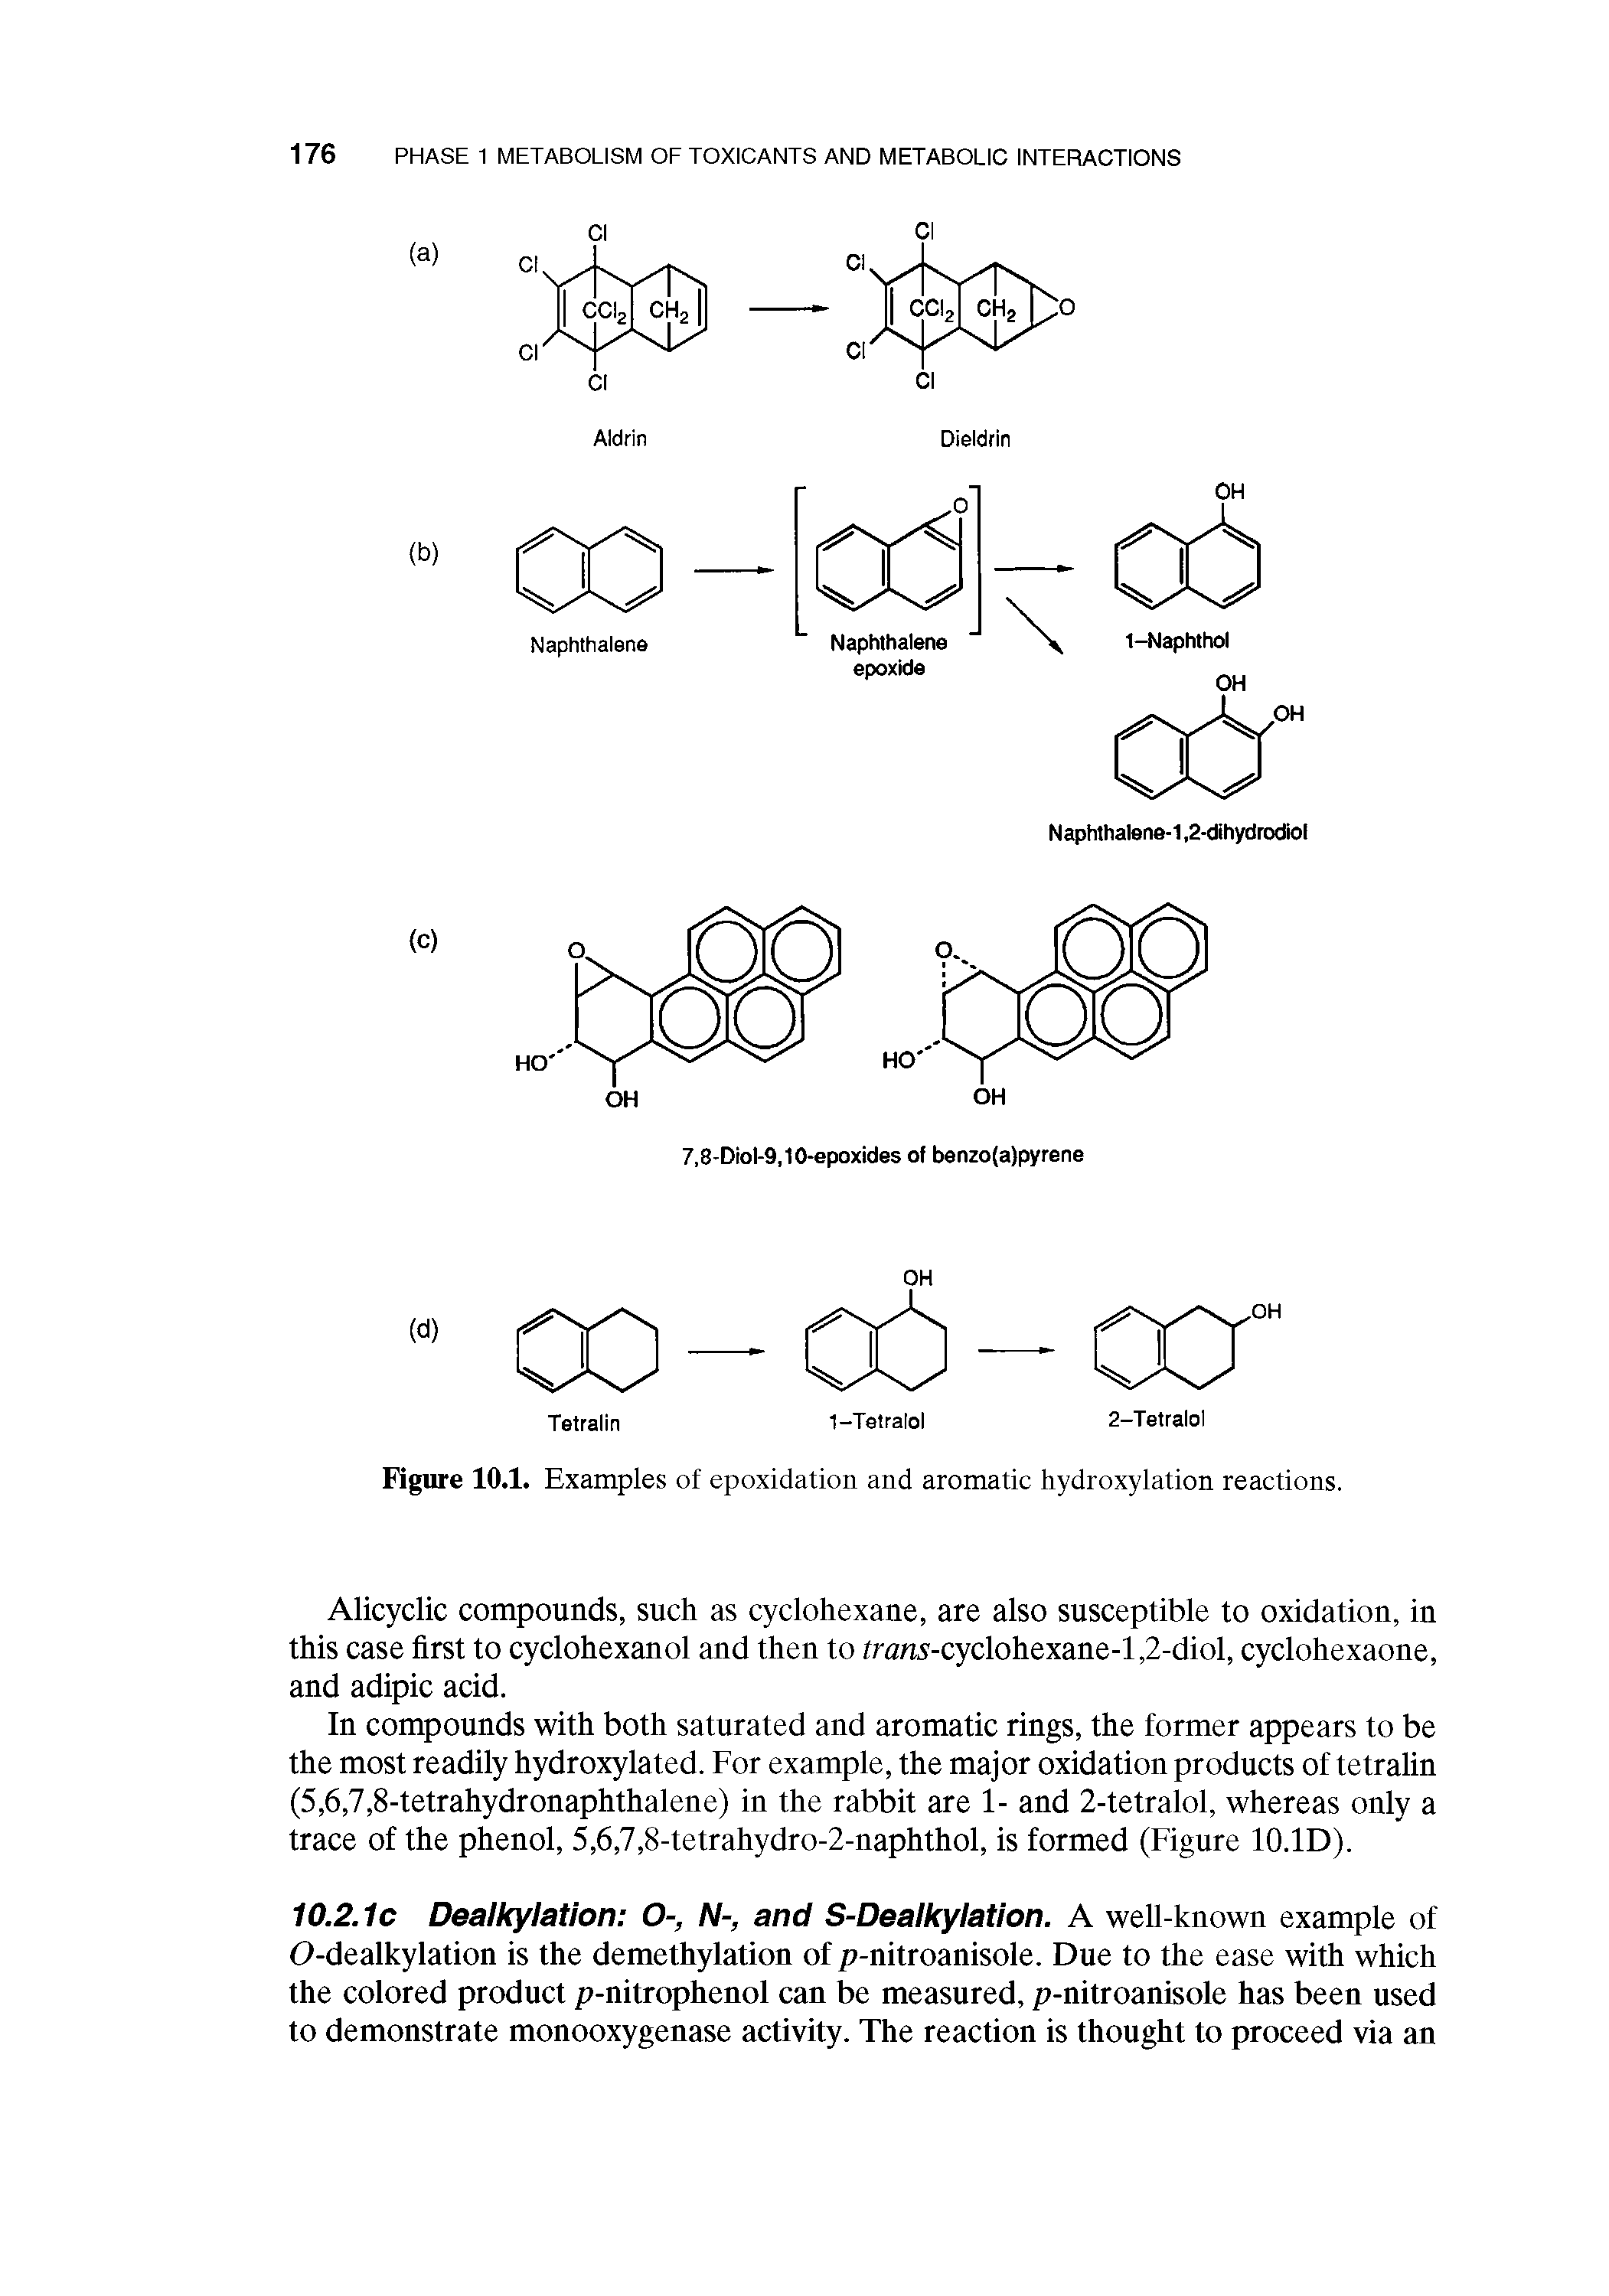 Figure 10.1. Examples of epoxidation and aromatic hydroxylation reactions.